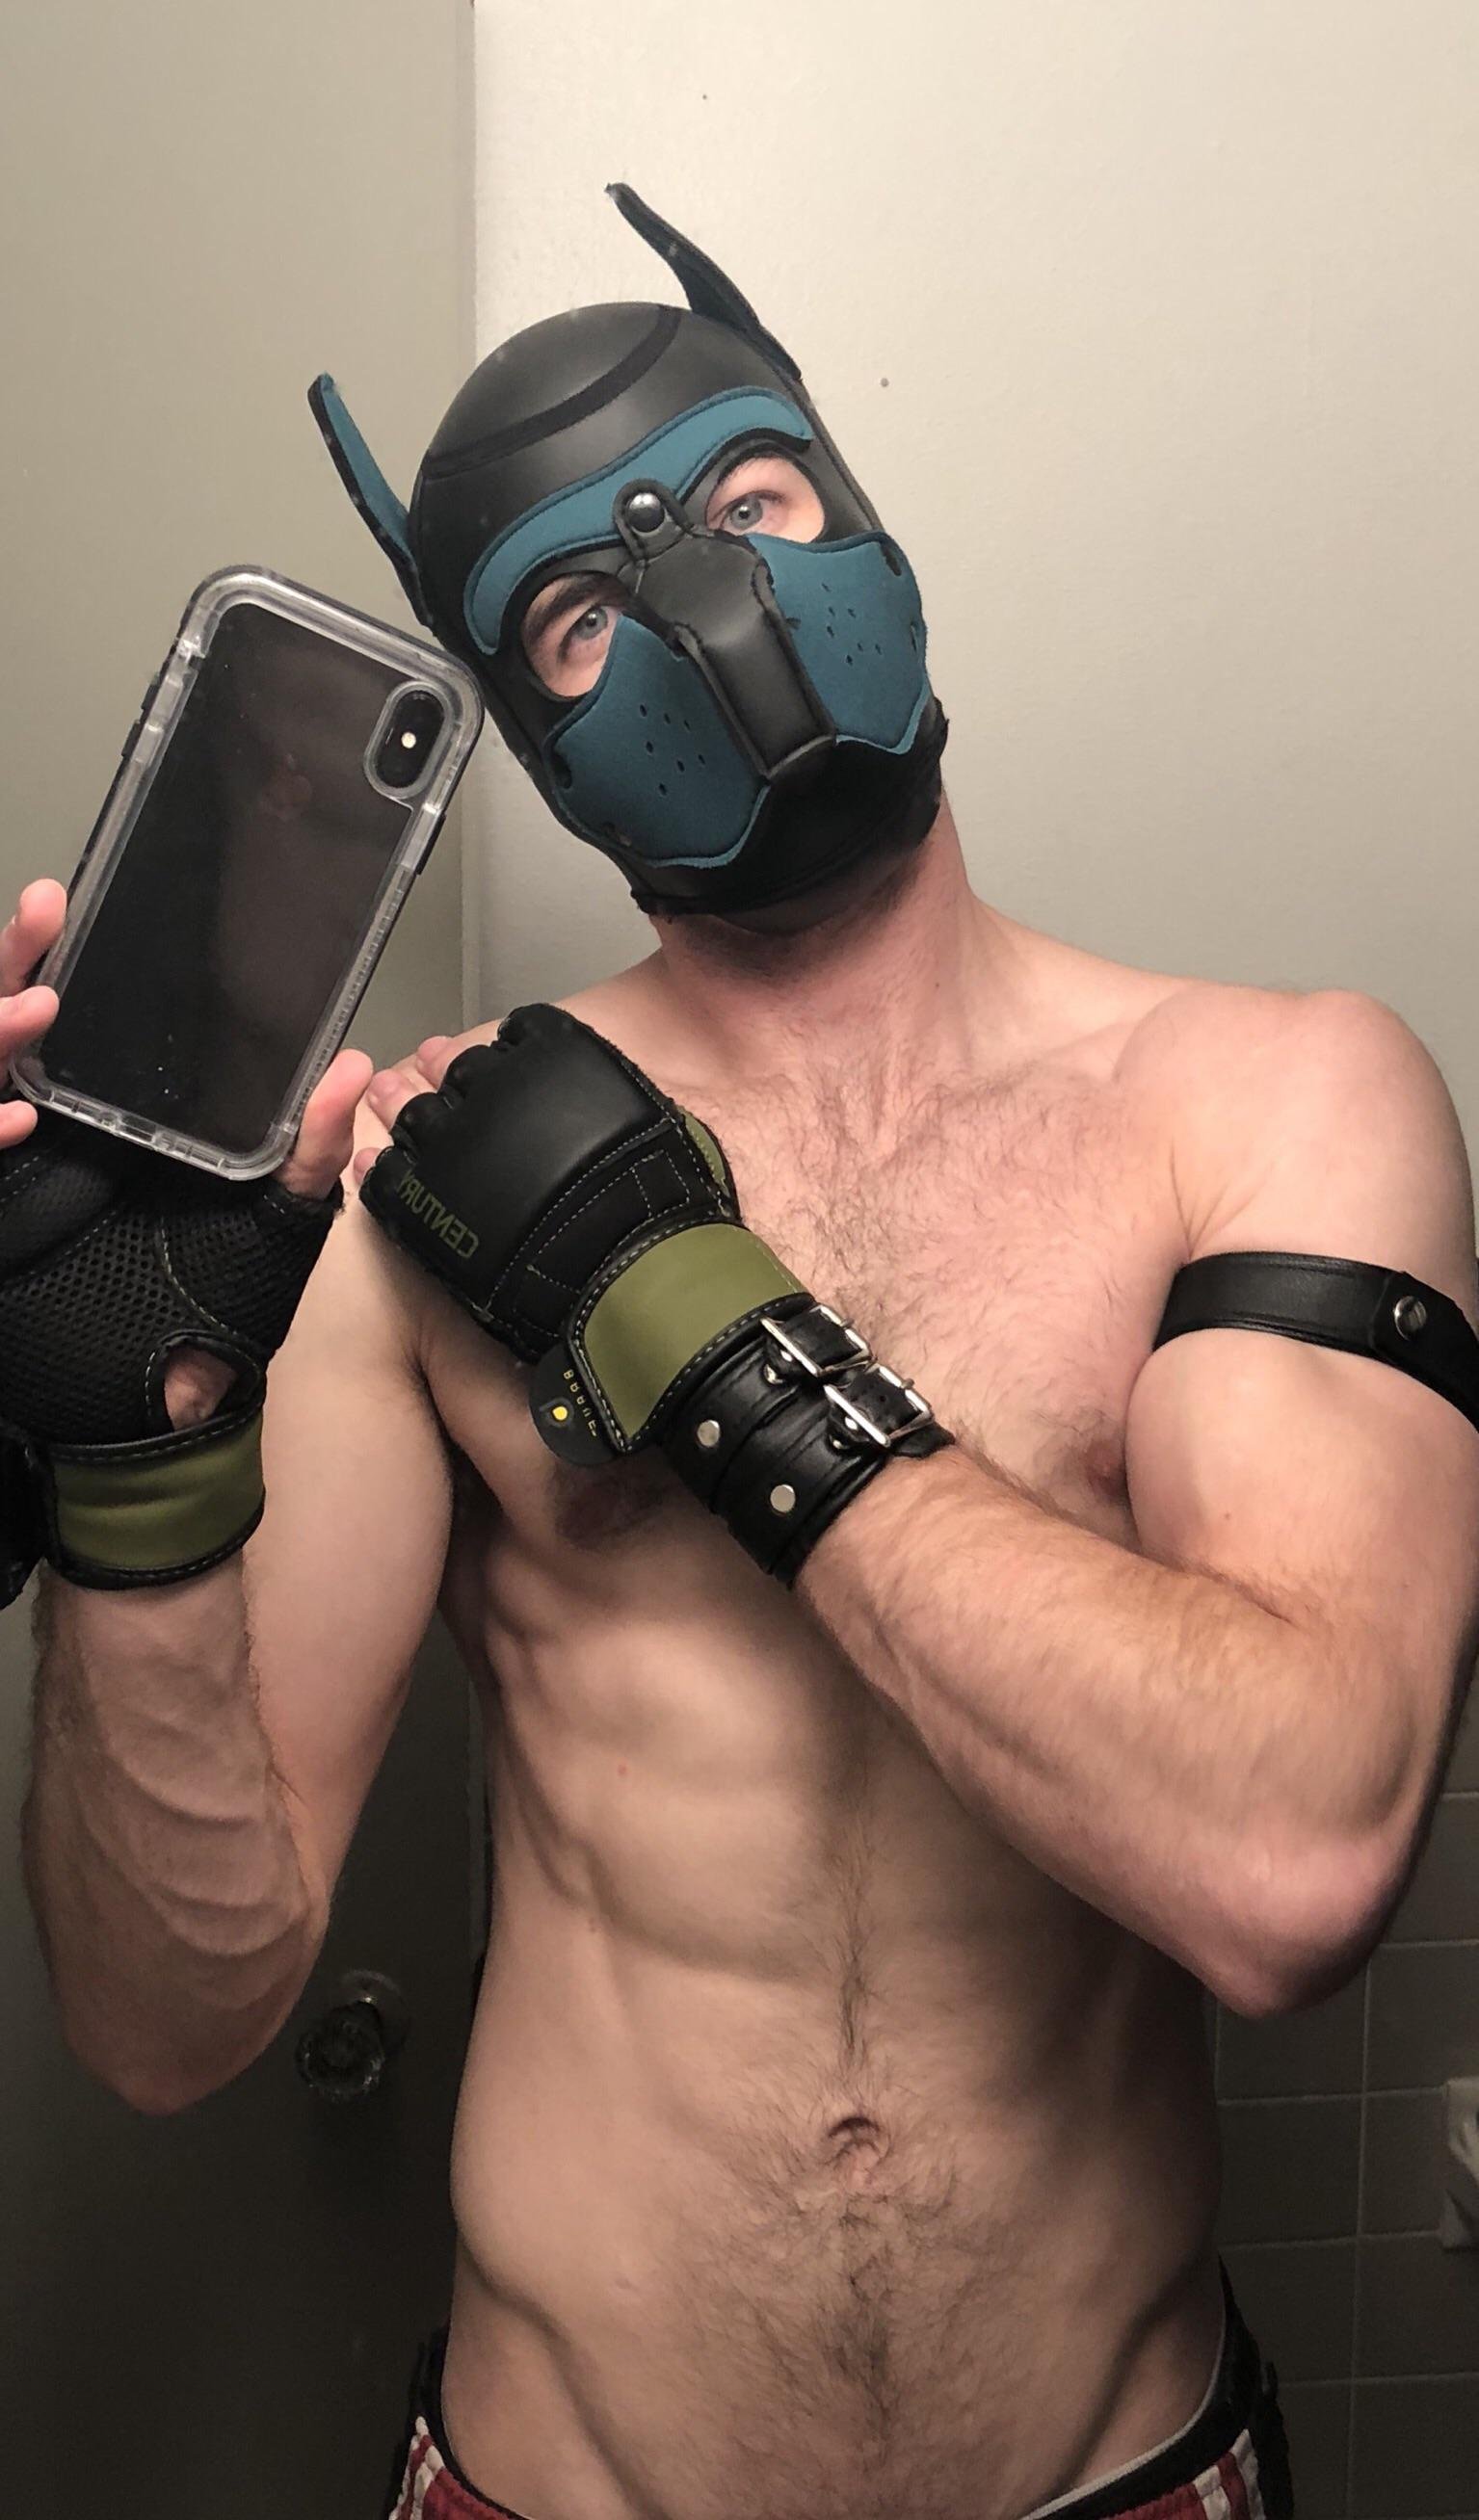 Woof! Sir is letting me wear His wristcuff and armband. Pup is happy! What do you think?